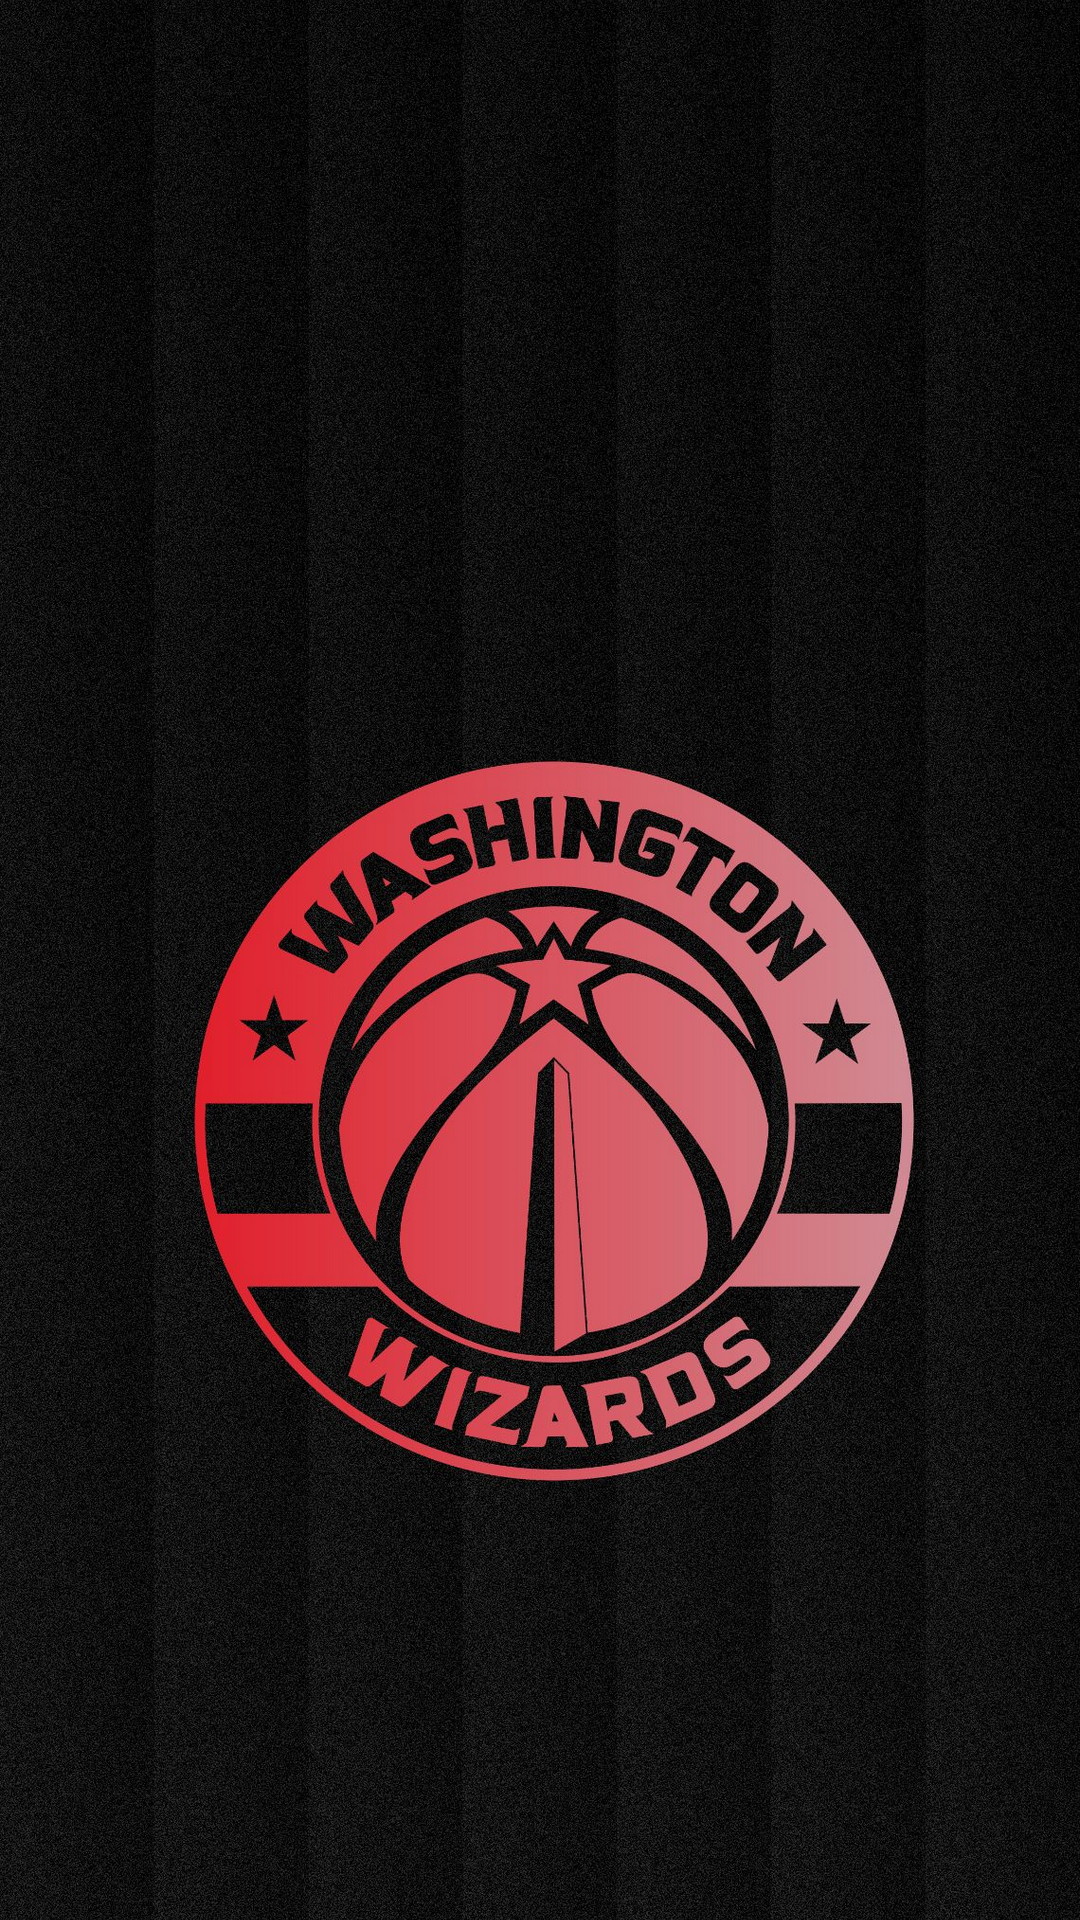 iPhone Wallpaper HD Washington Wizards with high-resolution 1080x1920 pixel. You can use this wallpaper for your Desktop Computer Backgrounds, Windows or Mac Screensavers, iPhone Lock screen, Tablet or Android and another Mobile Phone device